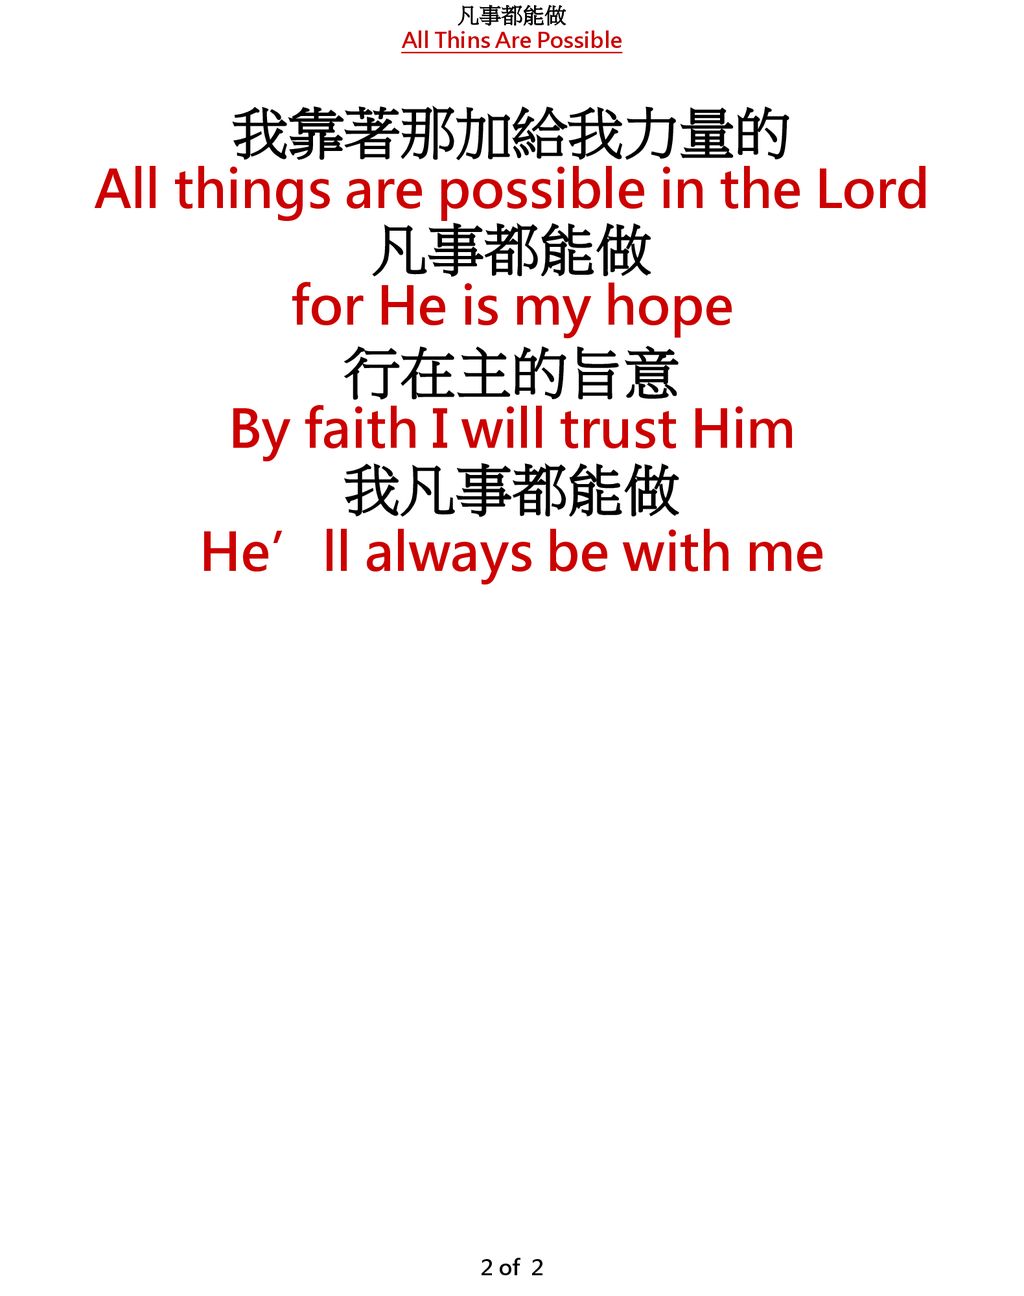 All things are possible in the Lord By faith I will trust Him